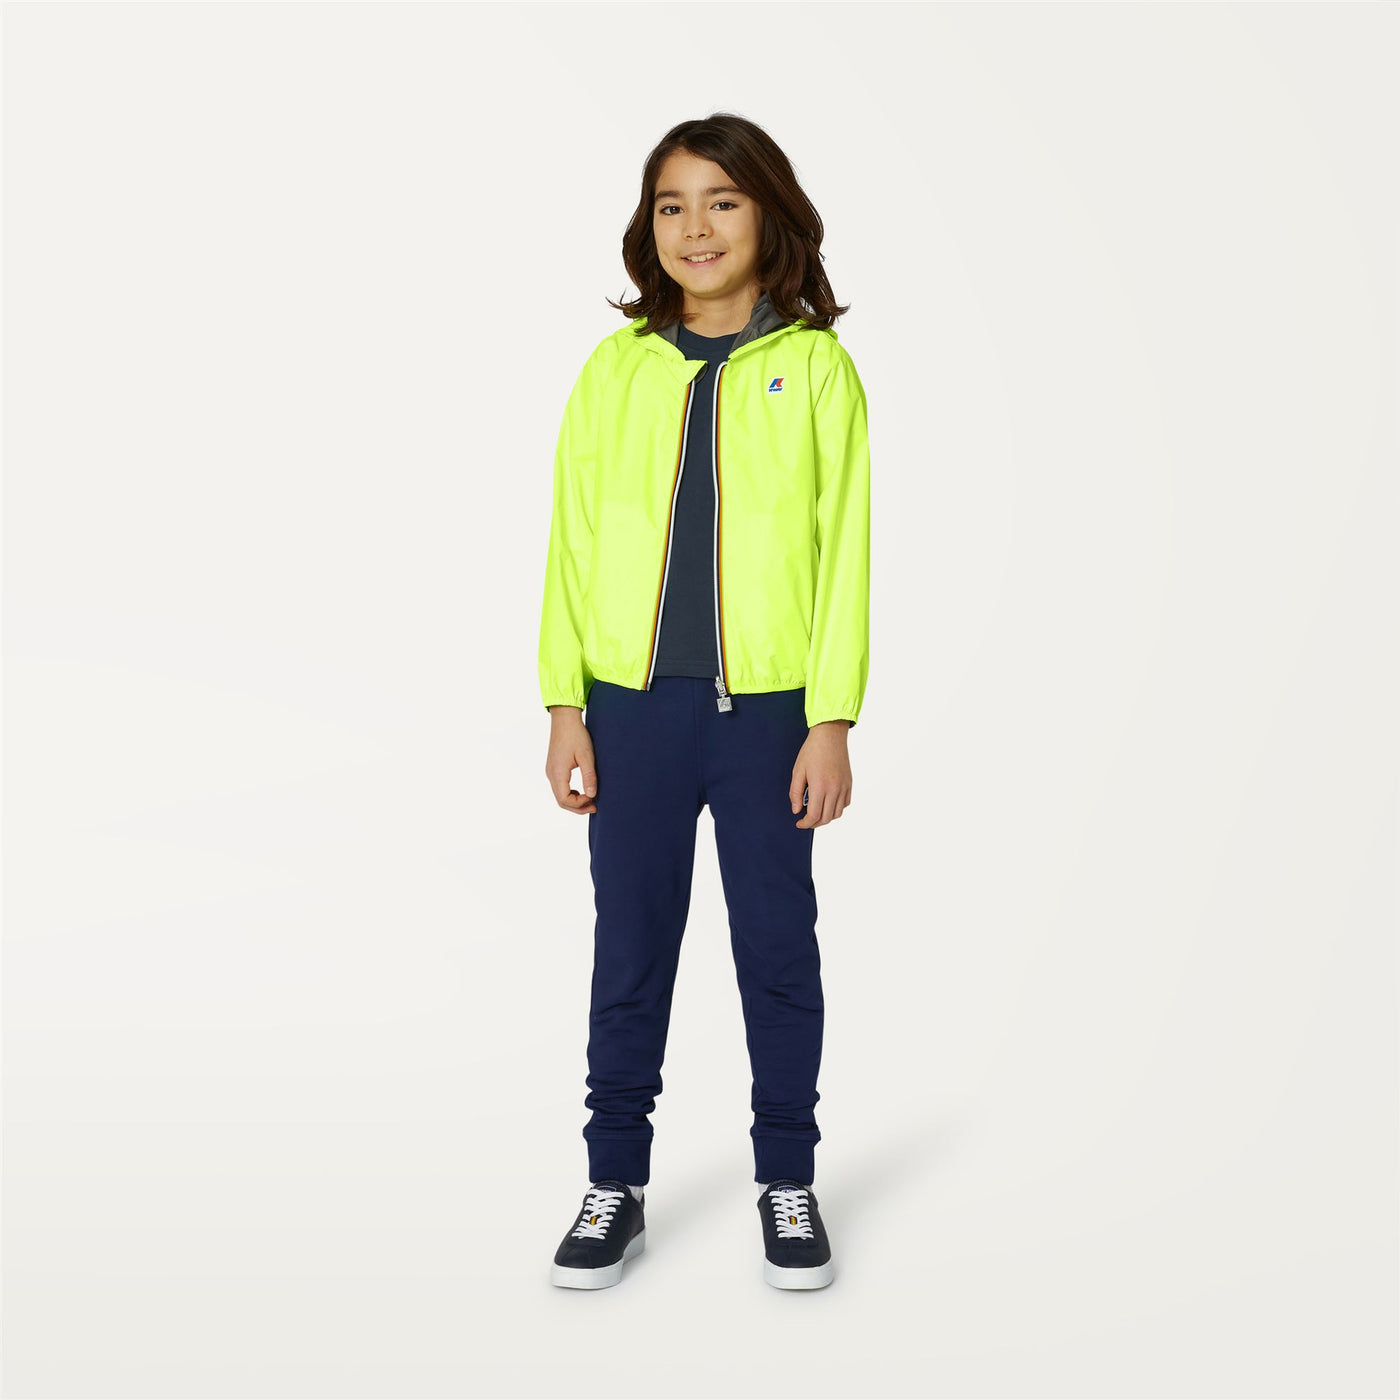 Jackets Boy P. JACQUES PLUS DOUBLE FLUO Short YELLOW FLUO-GREY Dressed Back (jpg Rgb)		